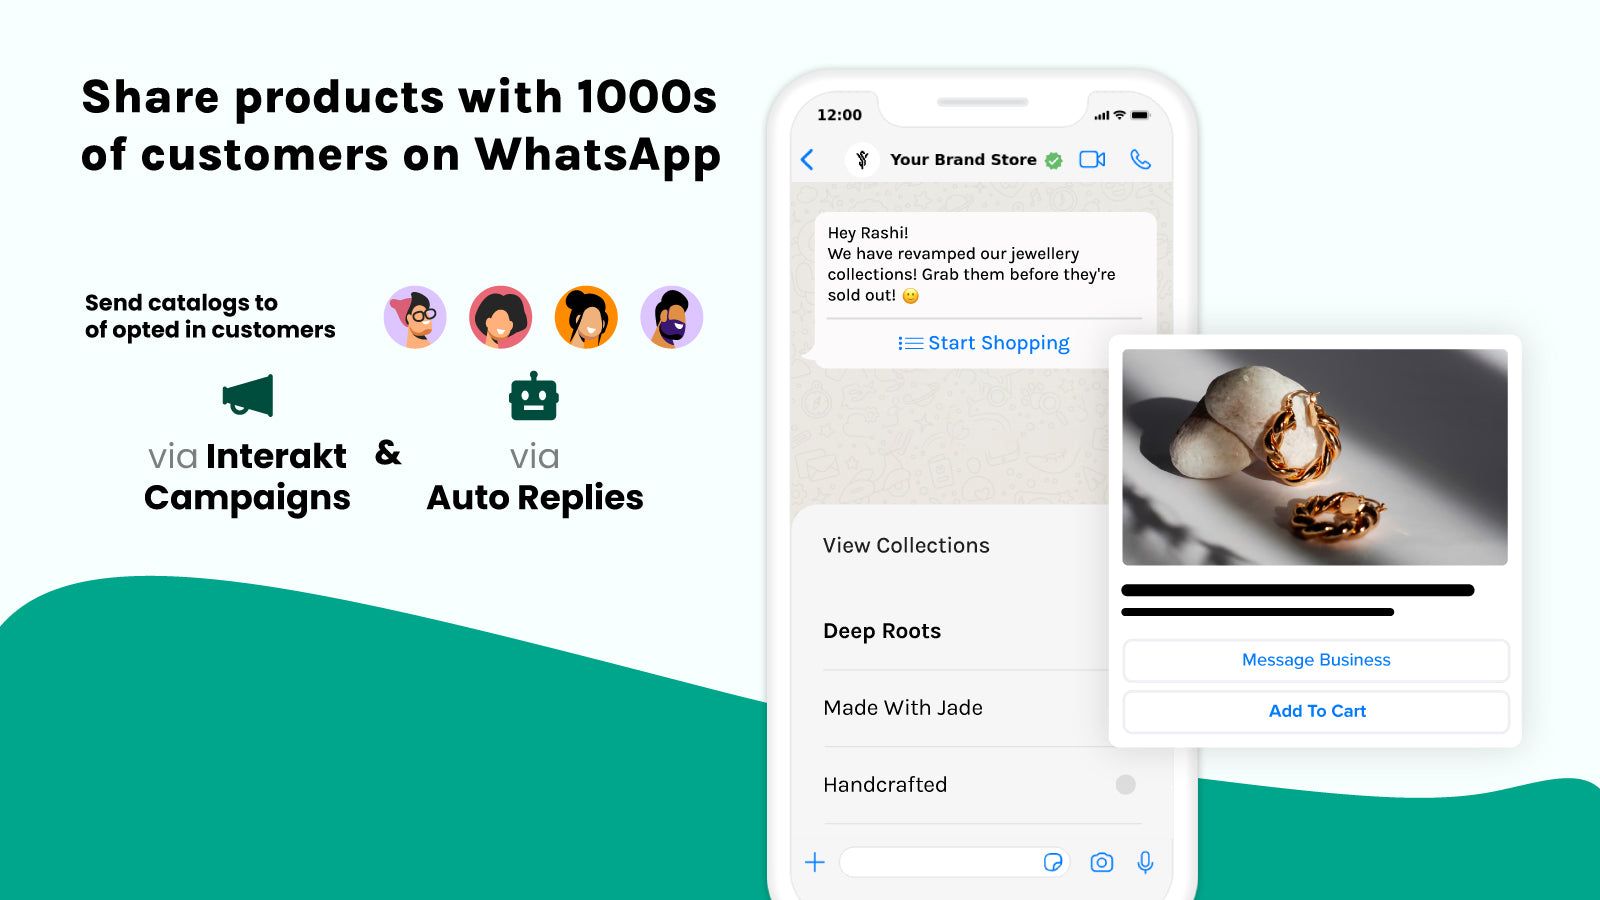 In single click send products to 1000s of customers on WhatsApp 